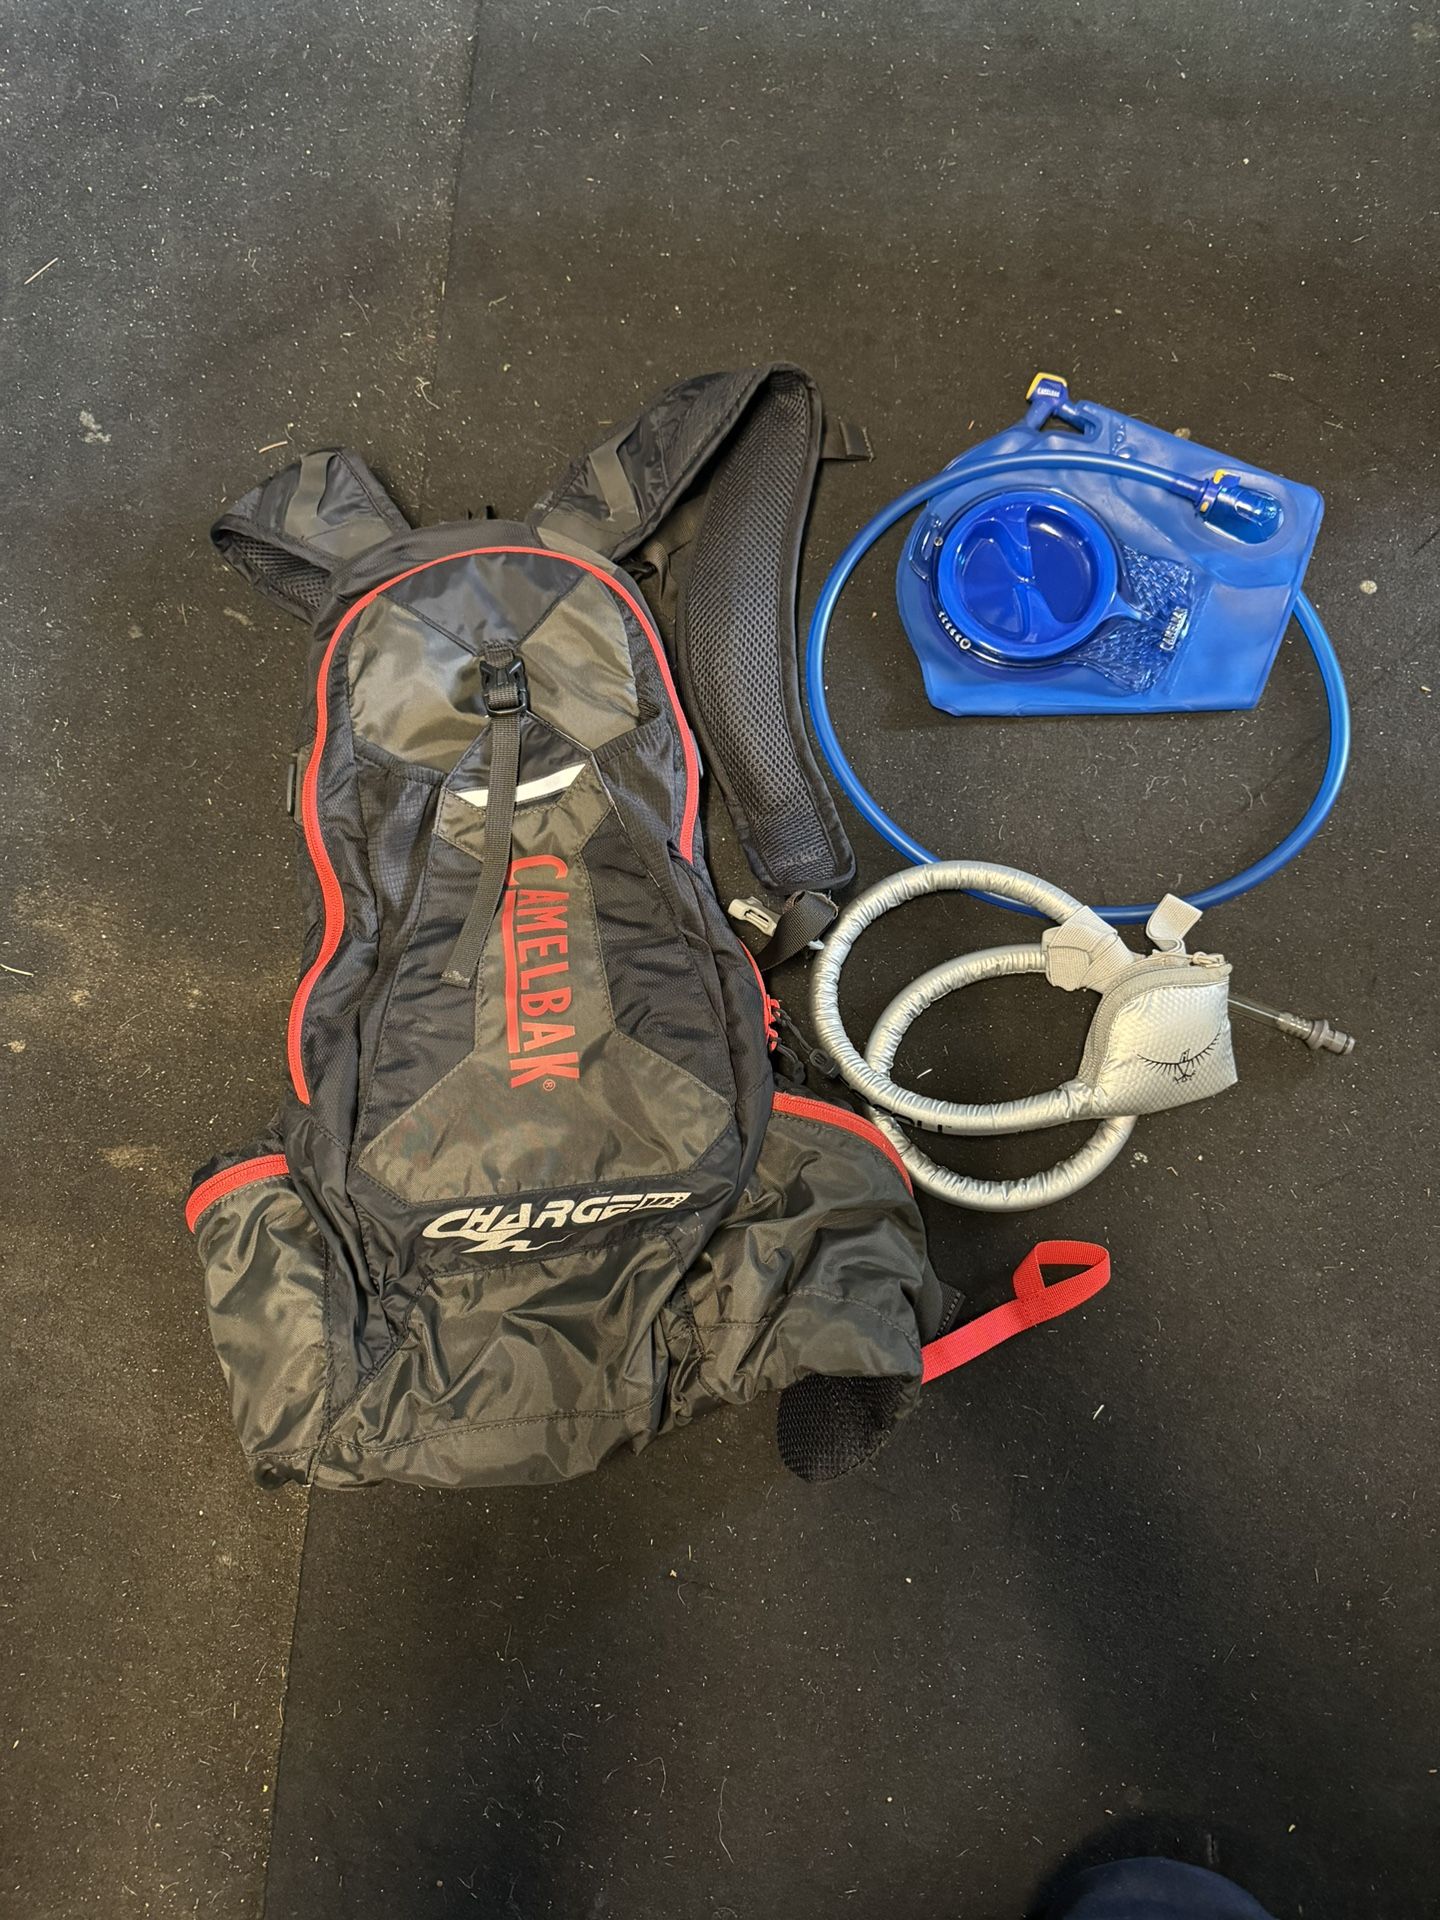 Camelbak Charge 10 Hydration Pack